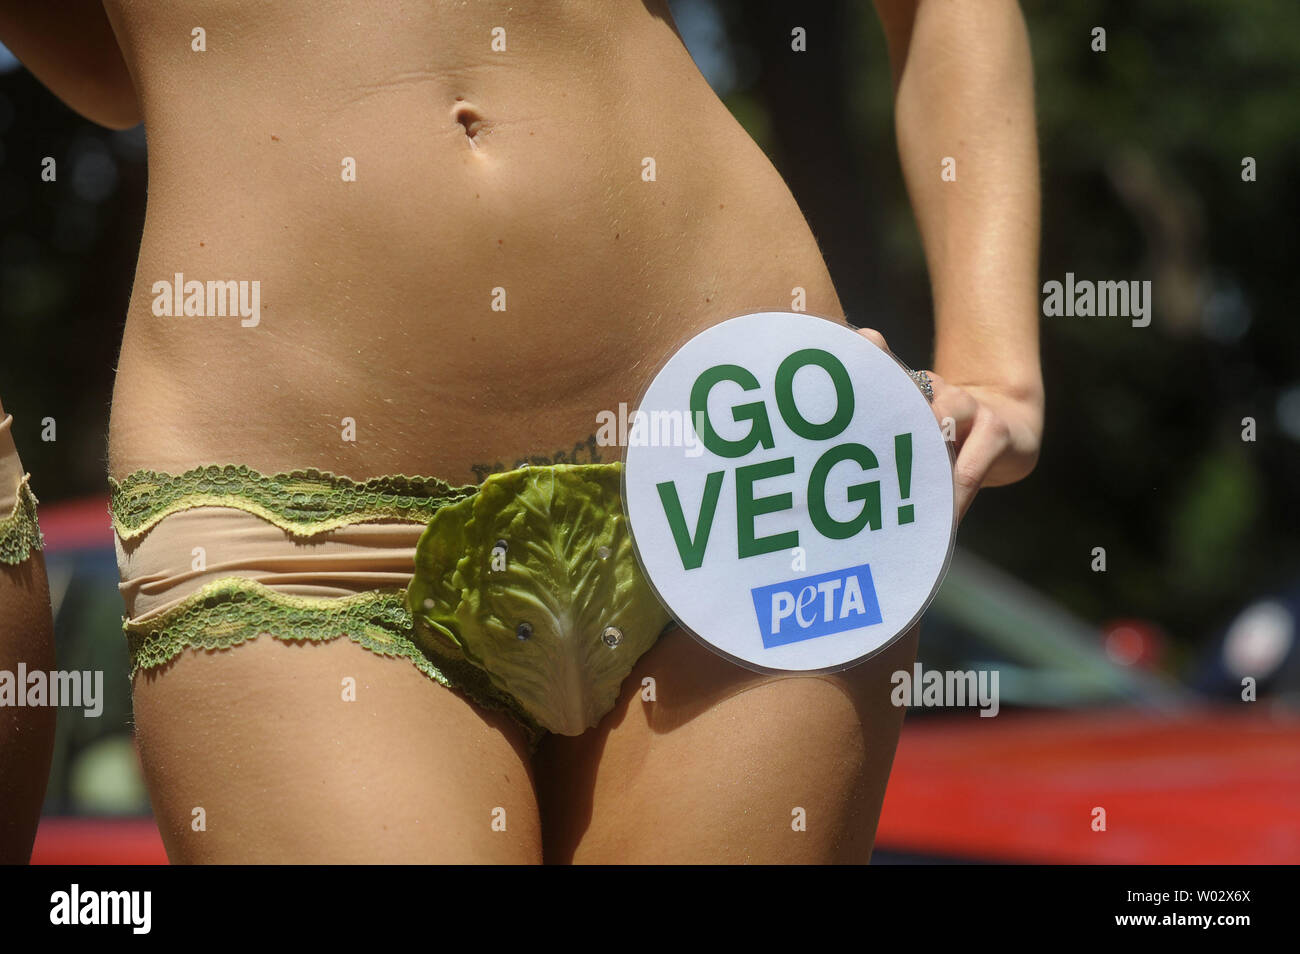 Playboy Playmate of the Year Jayde Nicole poses for a photograph prior to serving veggie hot dogs as part of an event put on by People for the Ethical Treatment of Animals (PETA) to call out against National Hot Dog Month, on Capitol Hill in Washington on July 15, 2009. UPI/Kevin Dietsch Stock Photo